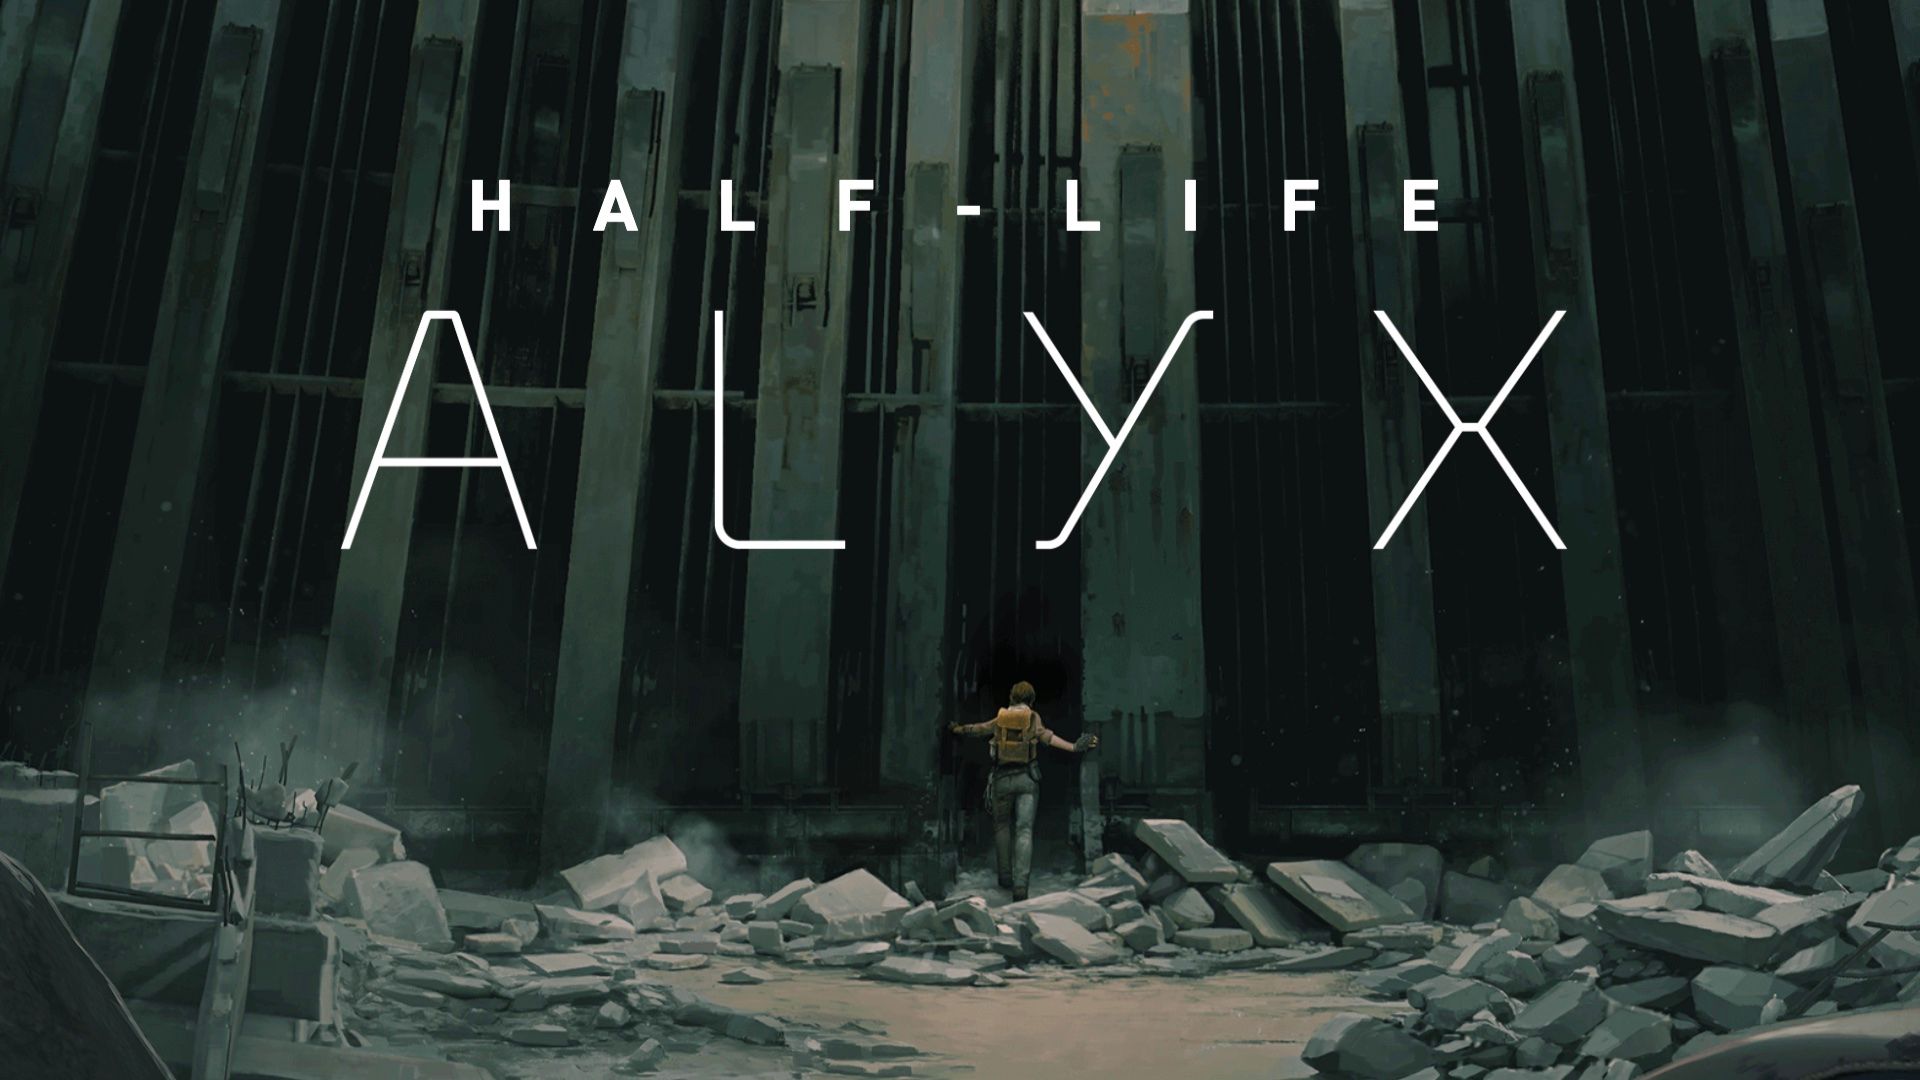 Half-Life: Alyx's Ending Explained - What It Means For The Series And VR